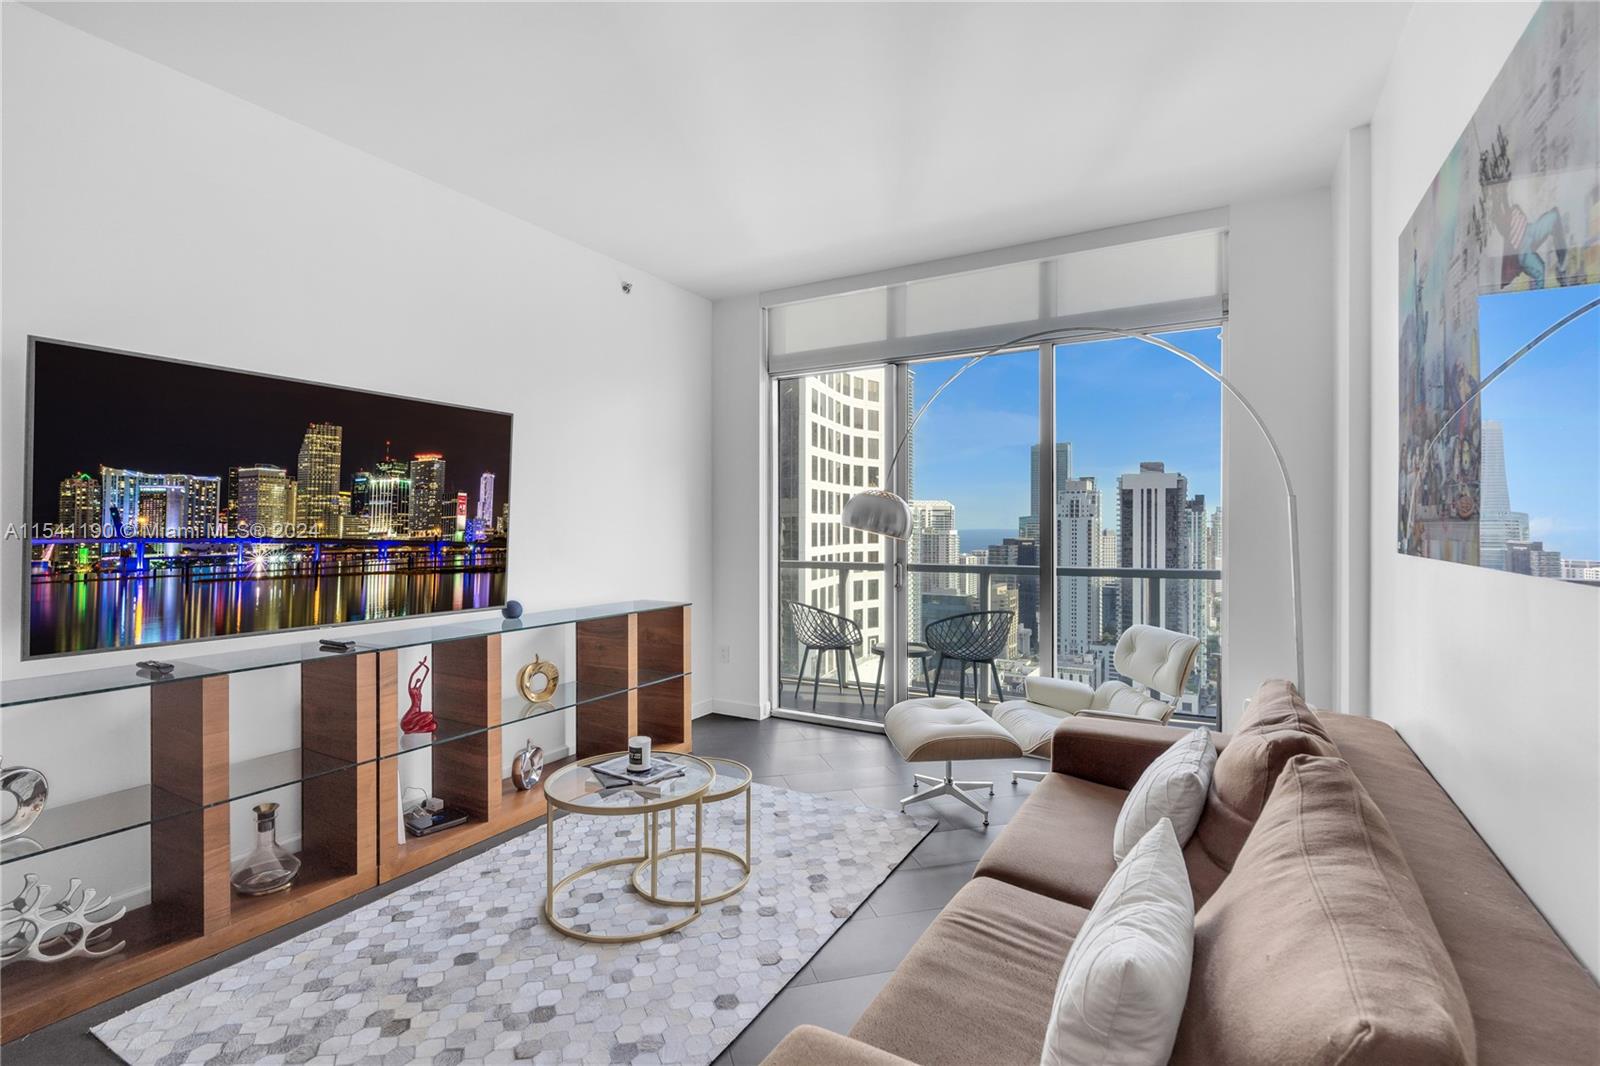 Enjoy luxury living at its finest in this fully furnished penthouse on the 43rd floor in the heart of Brickell. Italian designer finishes, new Samsung smart TVs, Alexa, and robotic vacuum, fully equipped kitchen and beautiful art. High speed WiFi and cable is included. This penthouse is also available for 6 month lease, making this an ideal option of a luxurious and comfortable short term stay. The high-end furnishings, volume ceilings and stunning views make this penthouse a unique and desirable option. The building offers two pools, on the 11th floor and the rooftop, jacuzzi, state-of-the-art gym, party room, movie theater, 24/7 security, attended lobby and valet service. One assigned parking space on the 3rd floor. One block from Brickell City Center, five star restaurants and much more